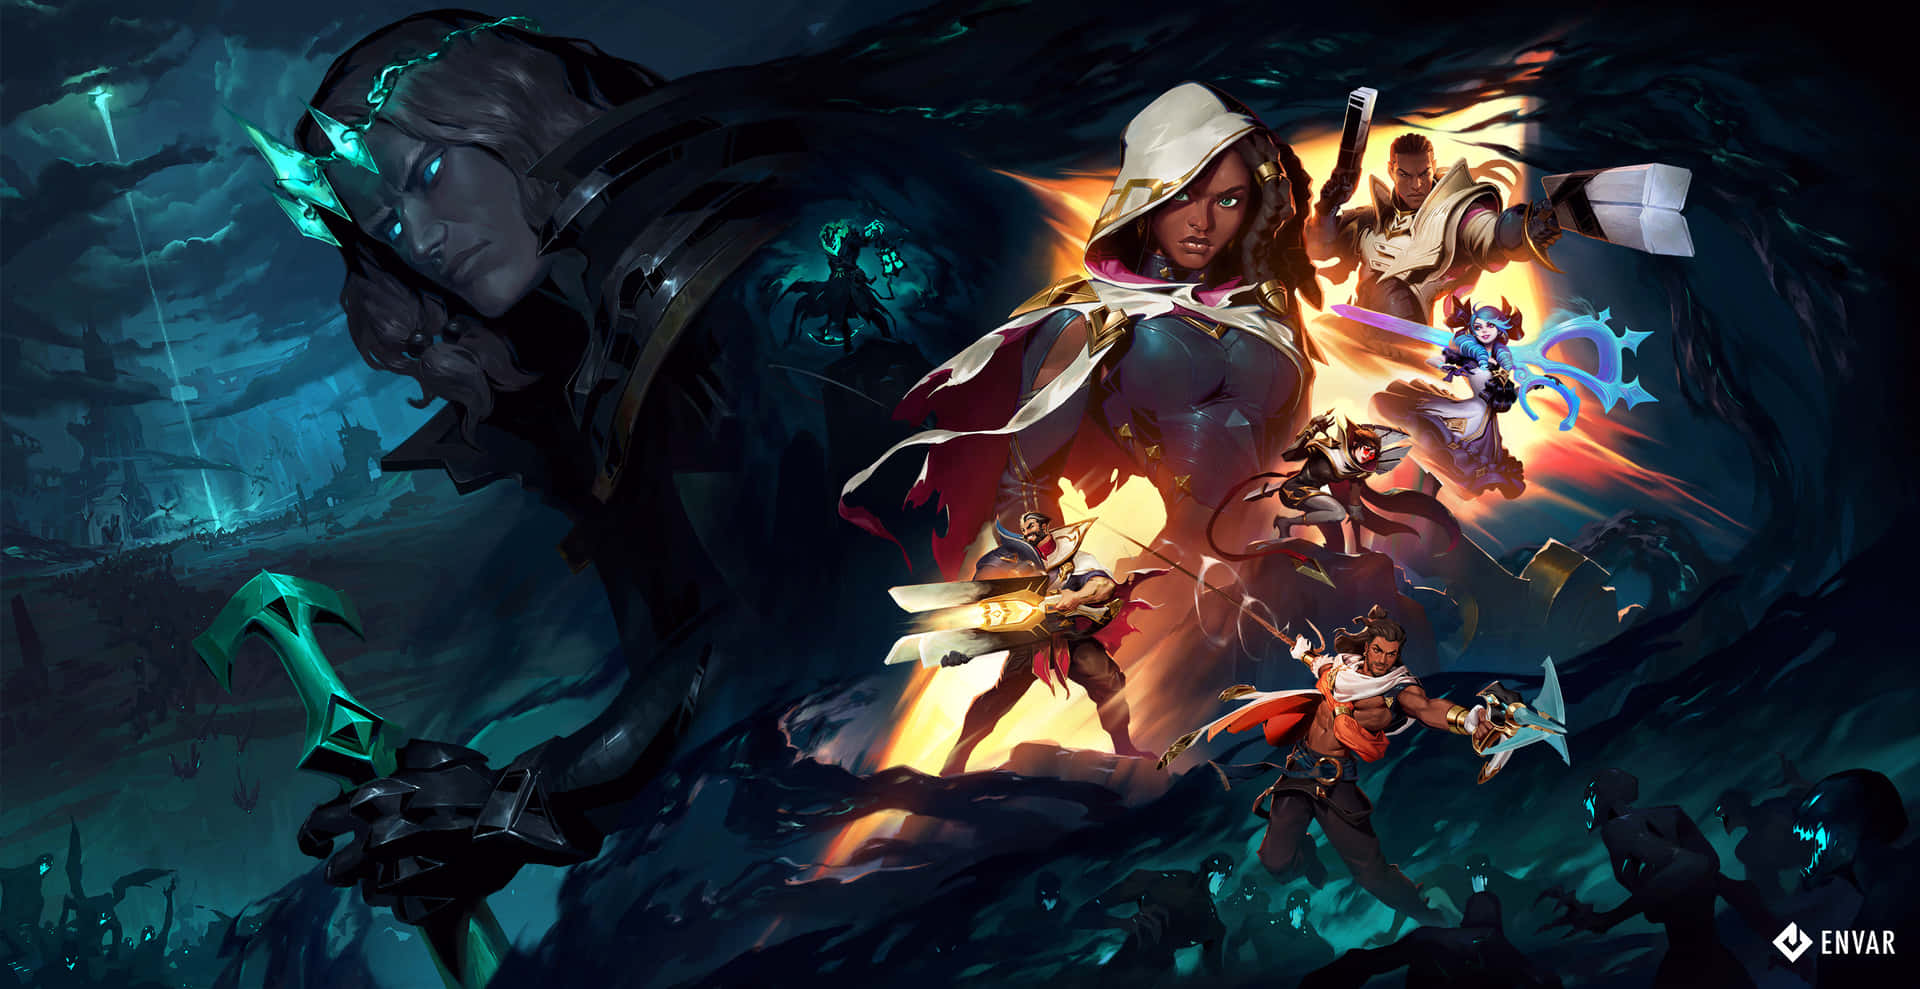 Enjoy playing League Of Legends on your laptop! Wallpaper